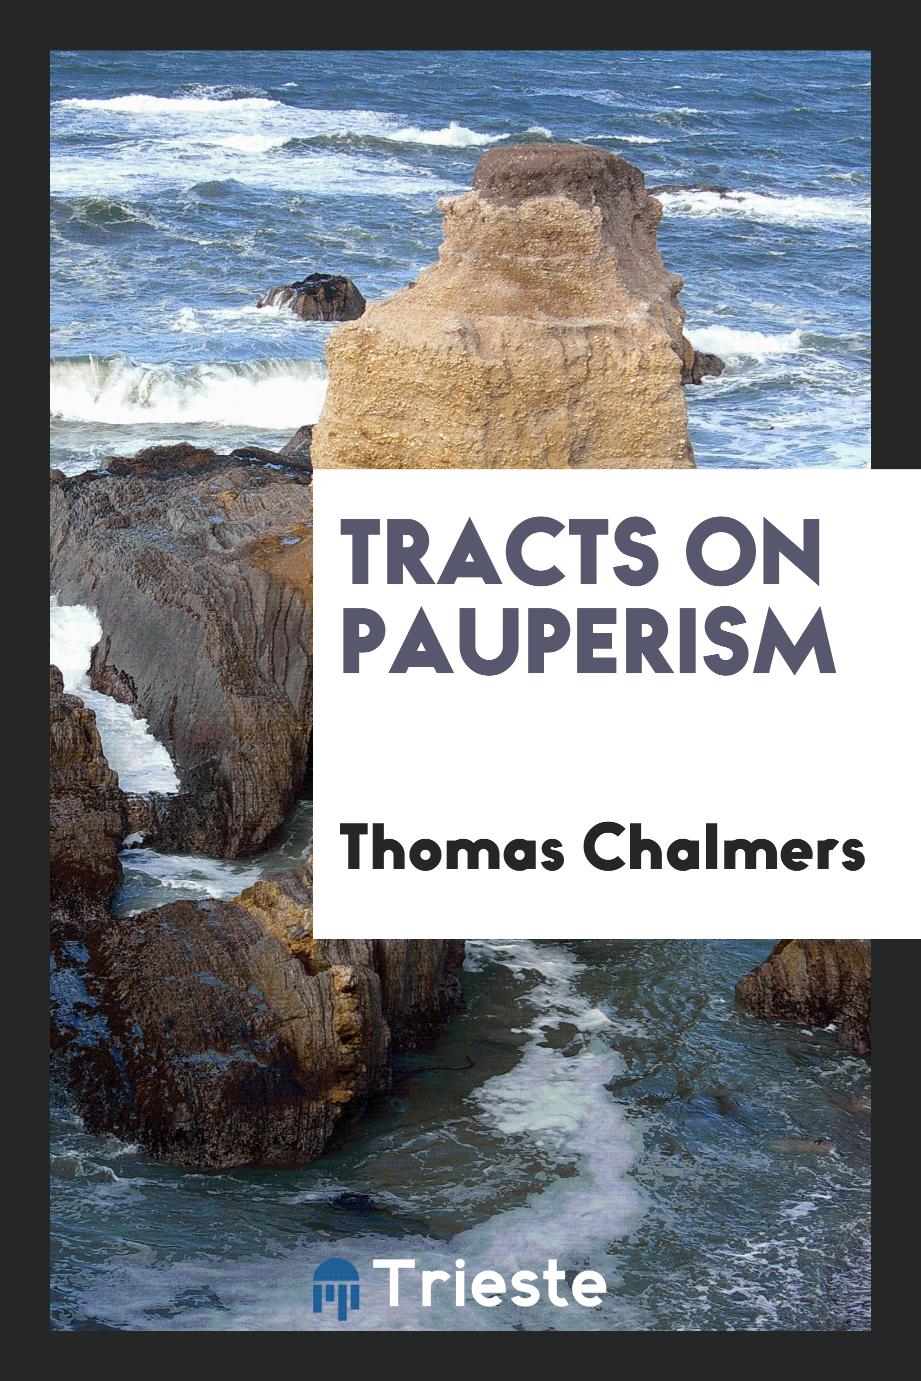 Tracts on pauperism